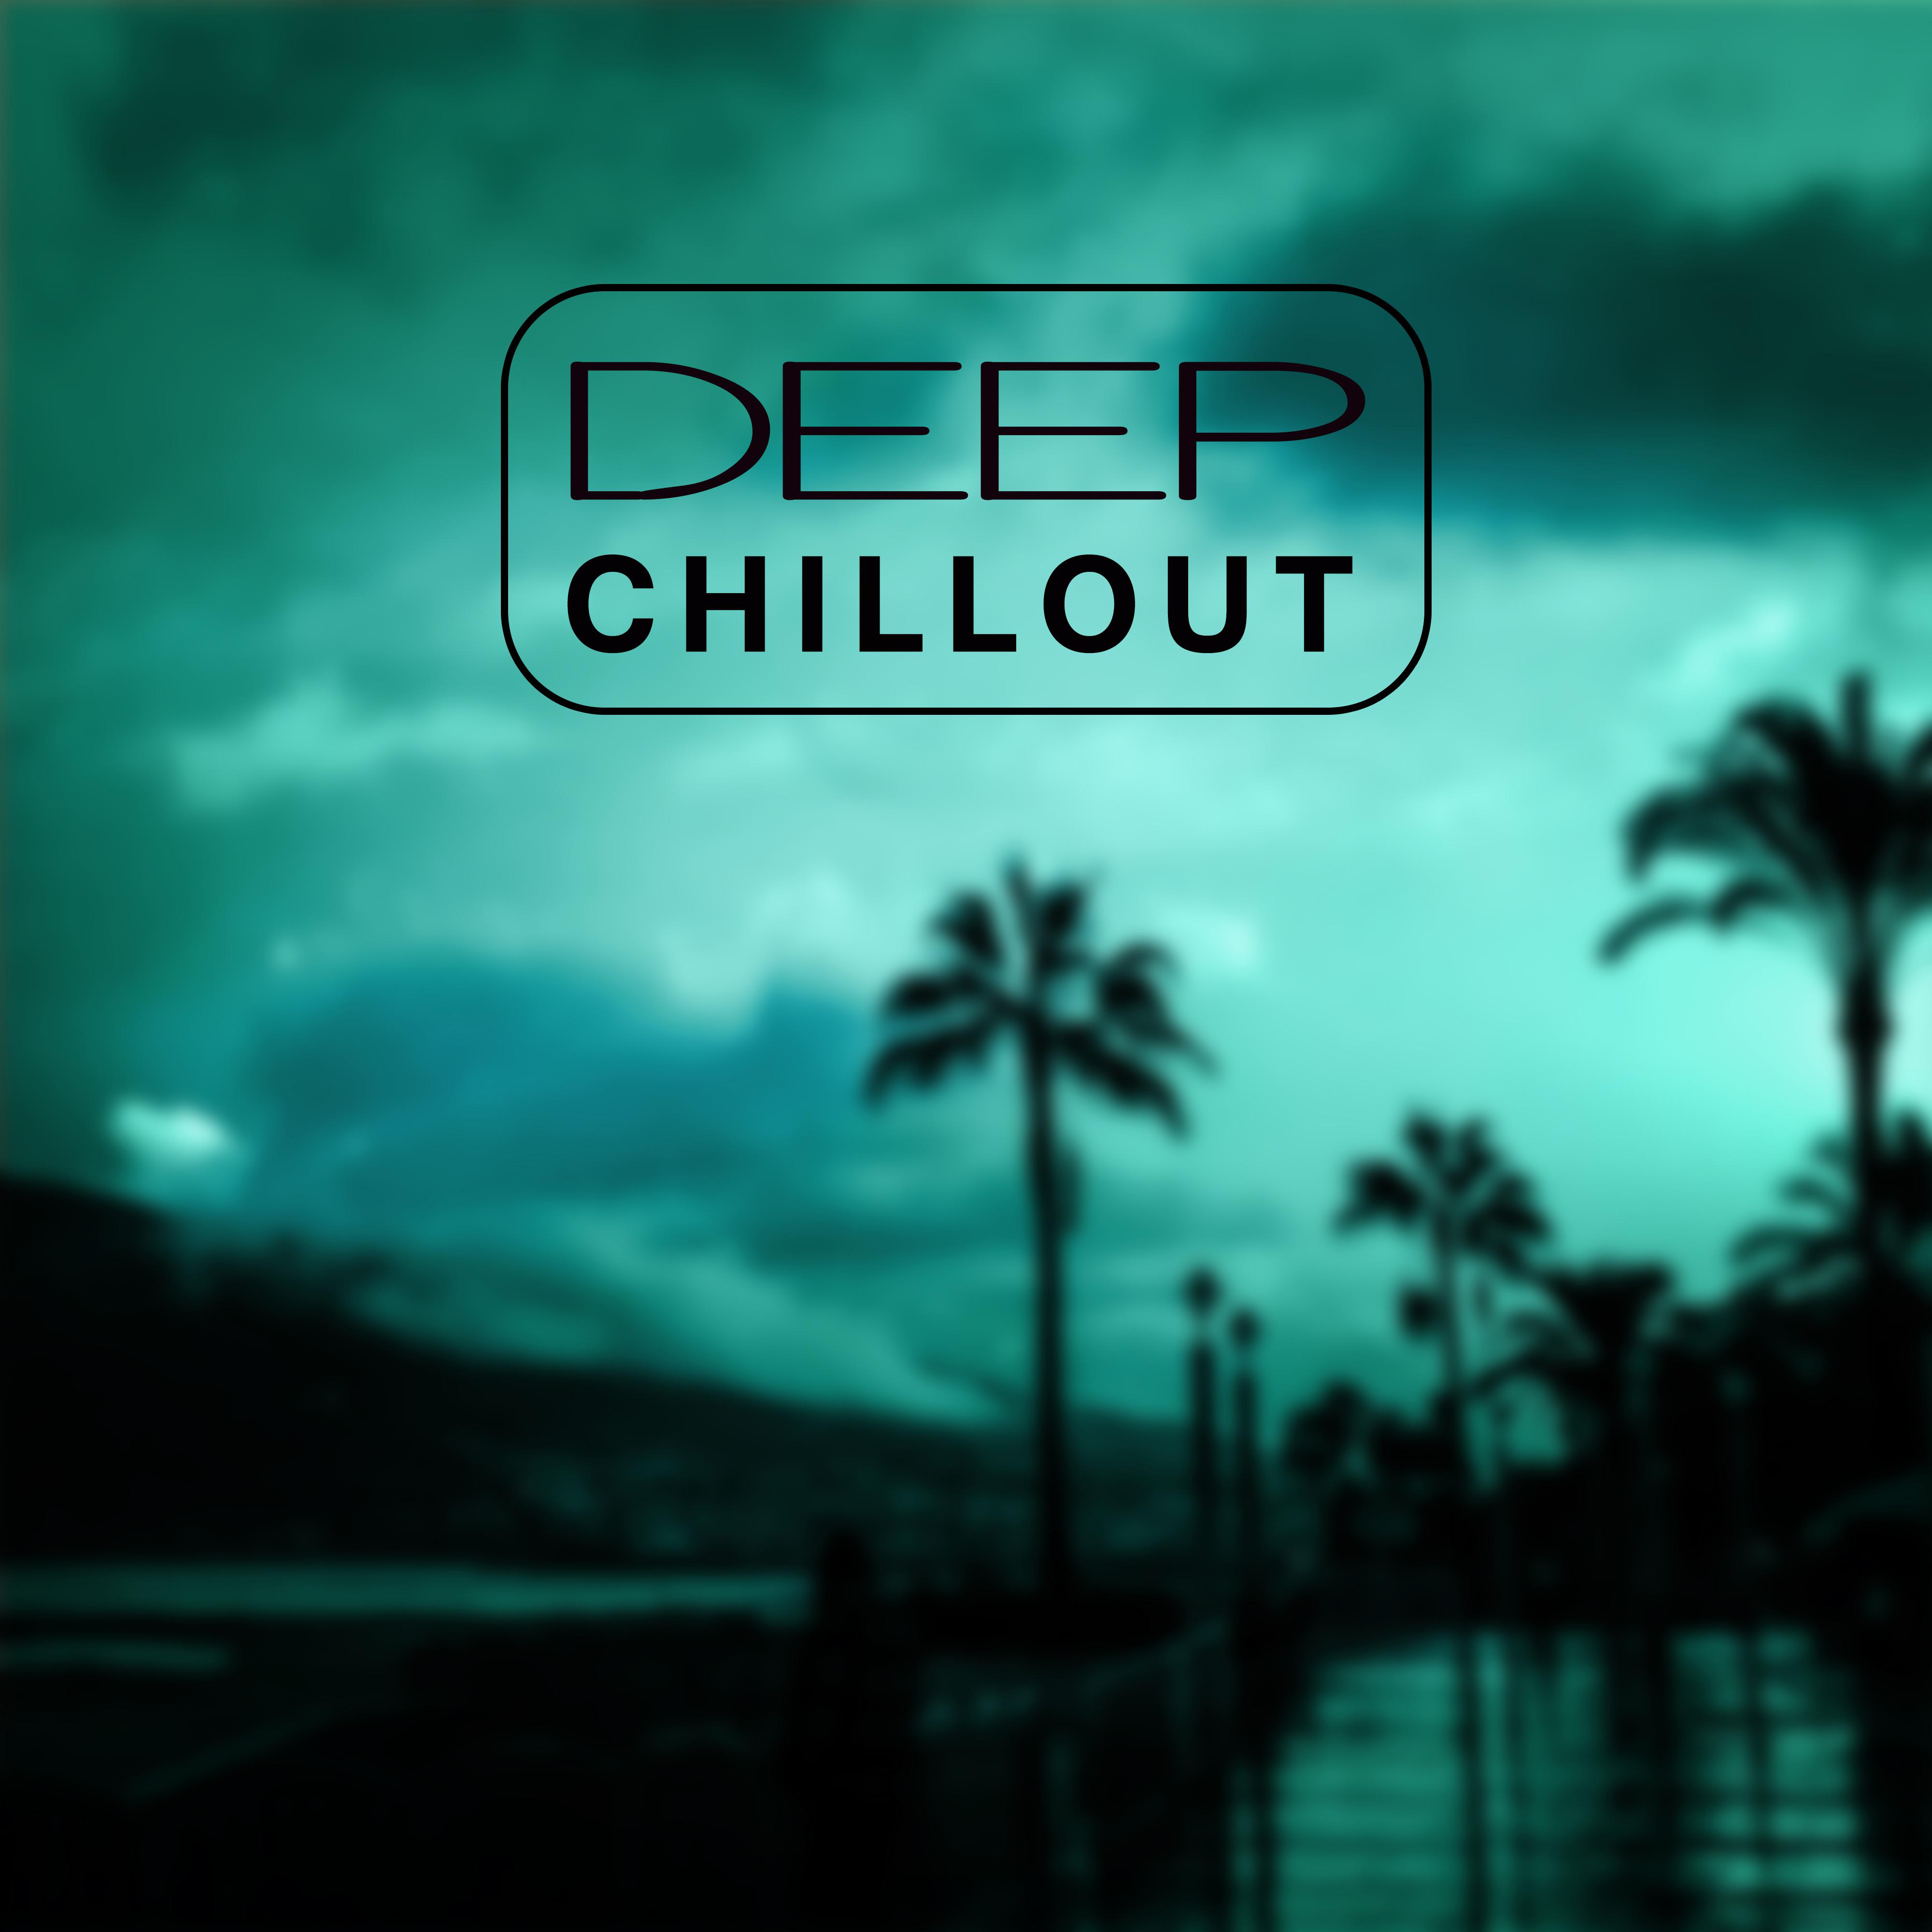 Deep Chillout – Summer Chill Out 2017, Lounge, Relaxation, Beach Party, Mr Chillout